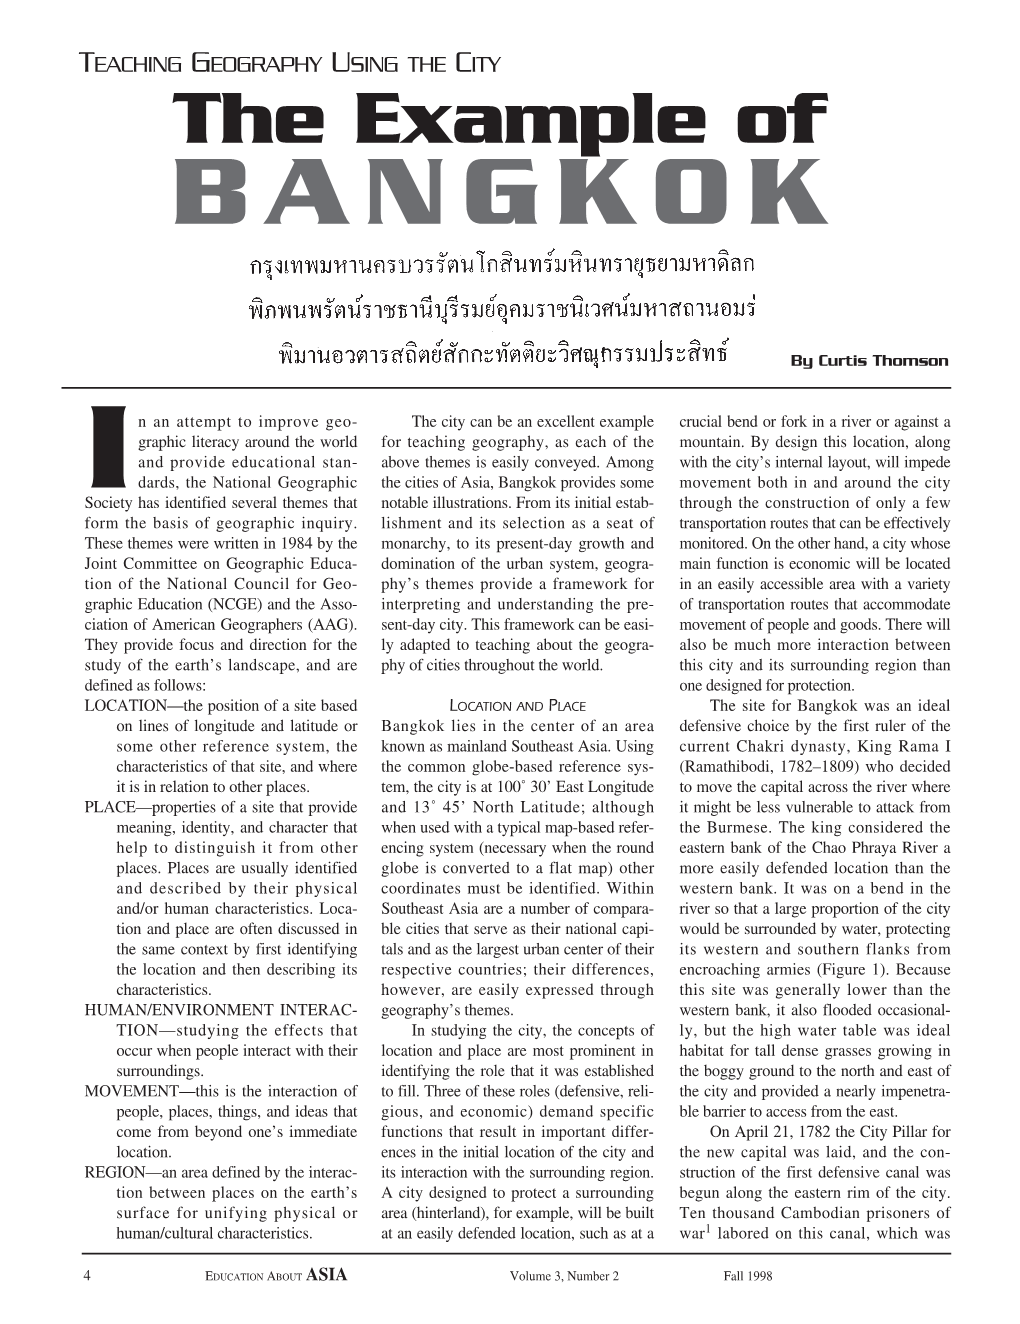 Teaching Geography Using the City: the Example of Bangkok